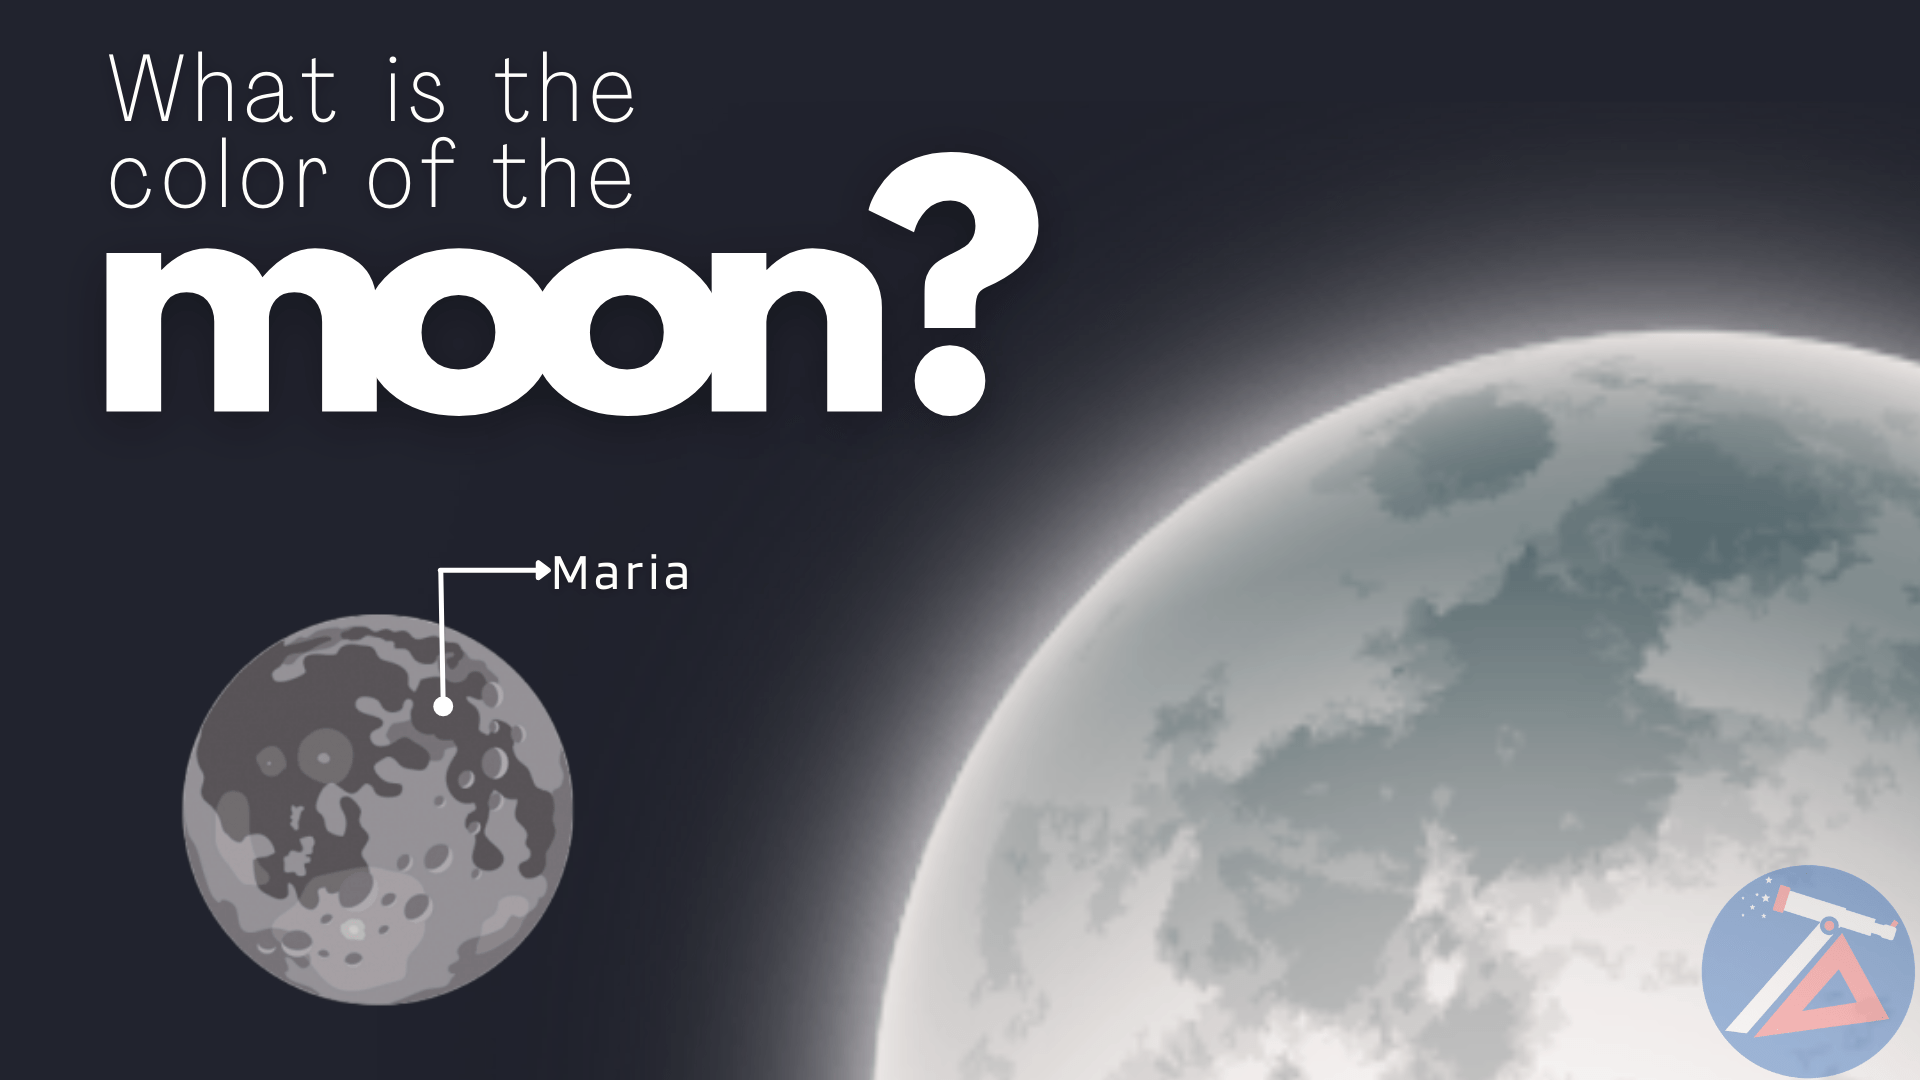 What Color Is the Moon?